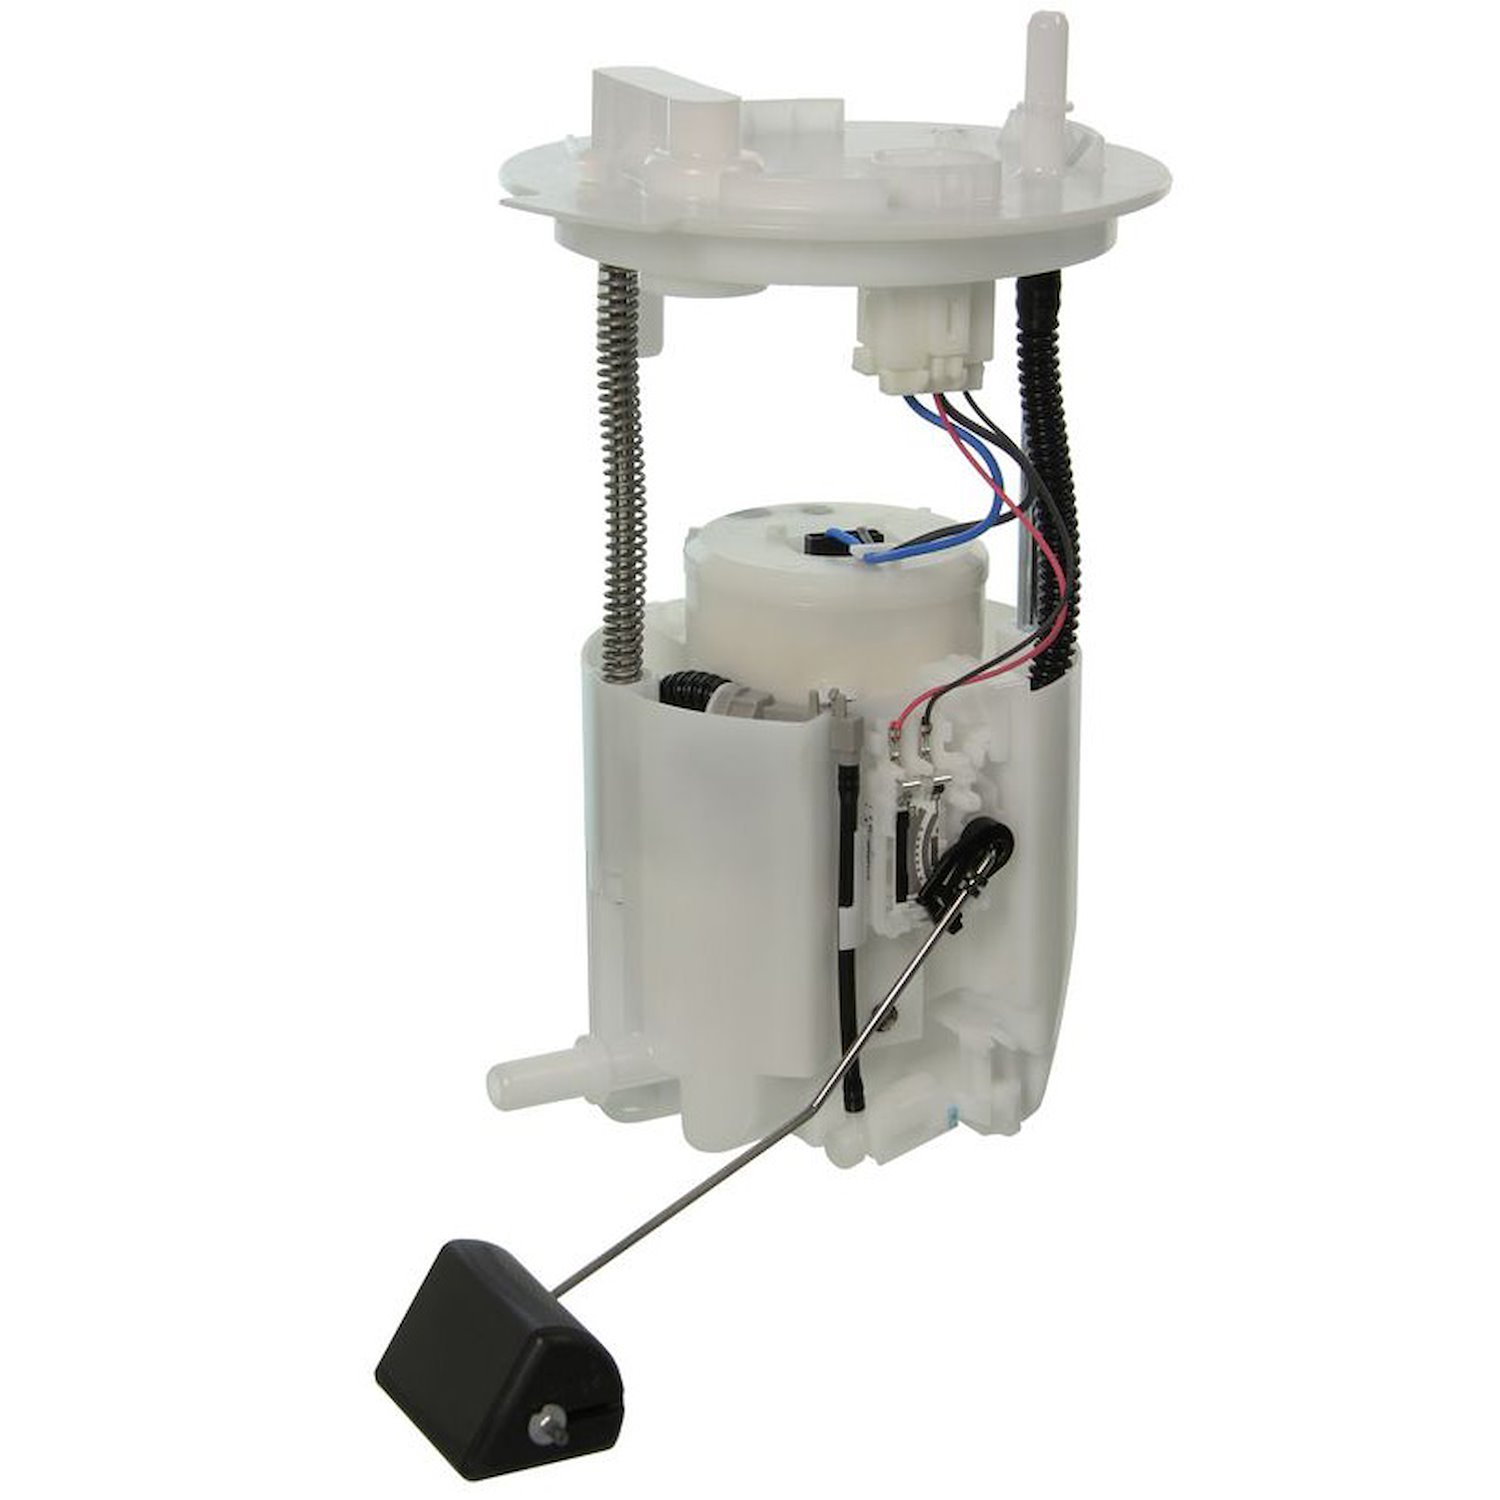 OE Ford/Lincoln Replacement Fuel Pump Module Assembly for 2010-2012 Ford Taurus/2011-2012 Lincoln MKS